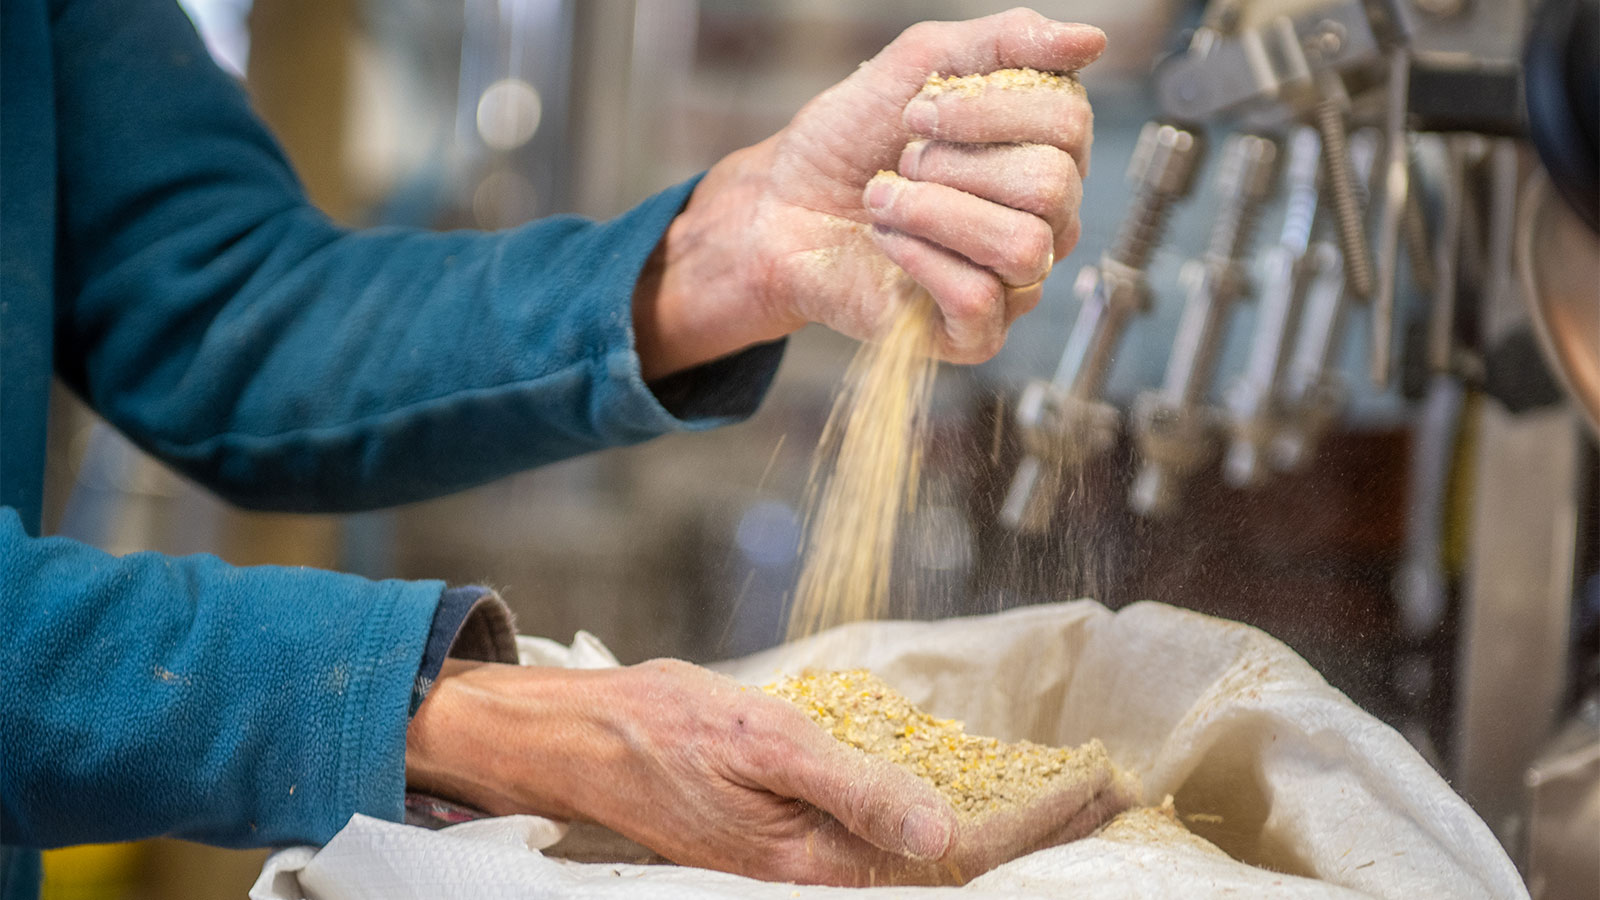 Hands pouring barley to make beer